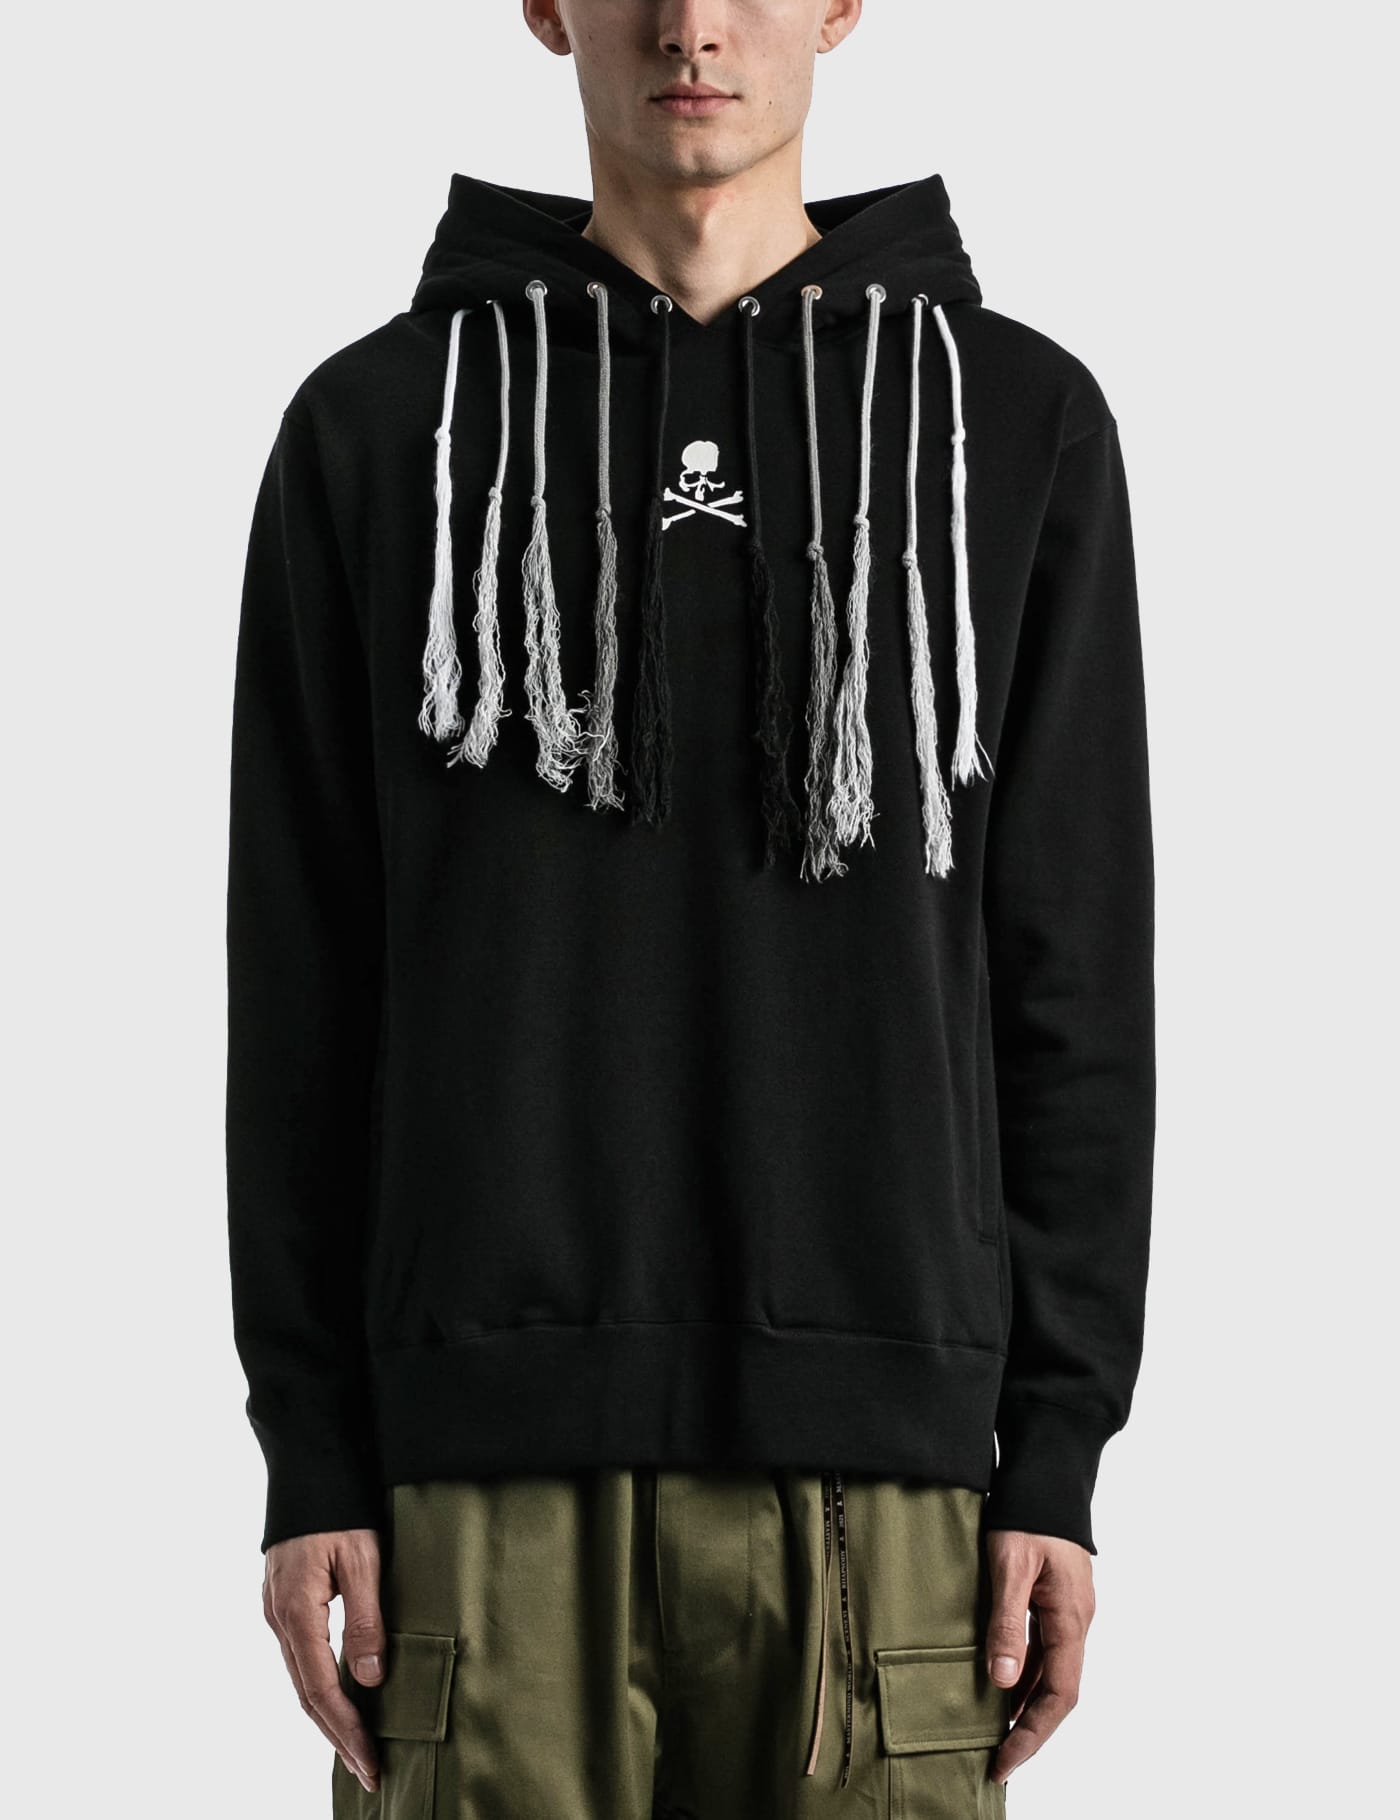 Mastermind World - Multi String Hoodie | HBX - Globally Curated 